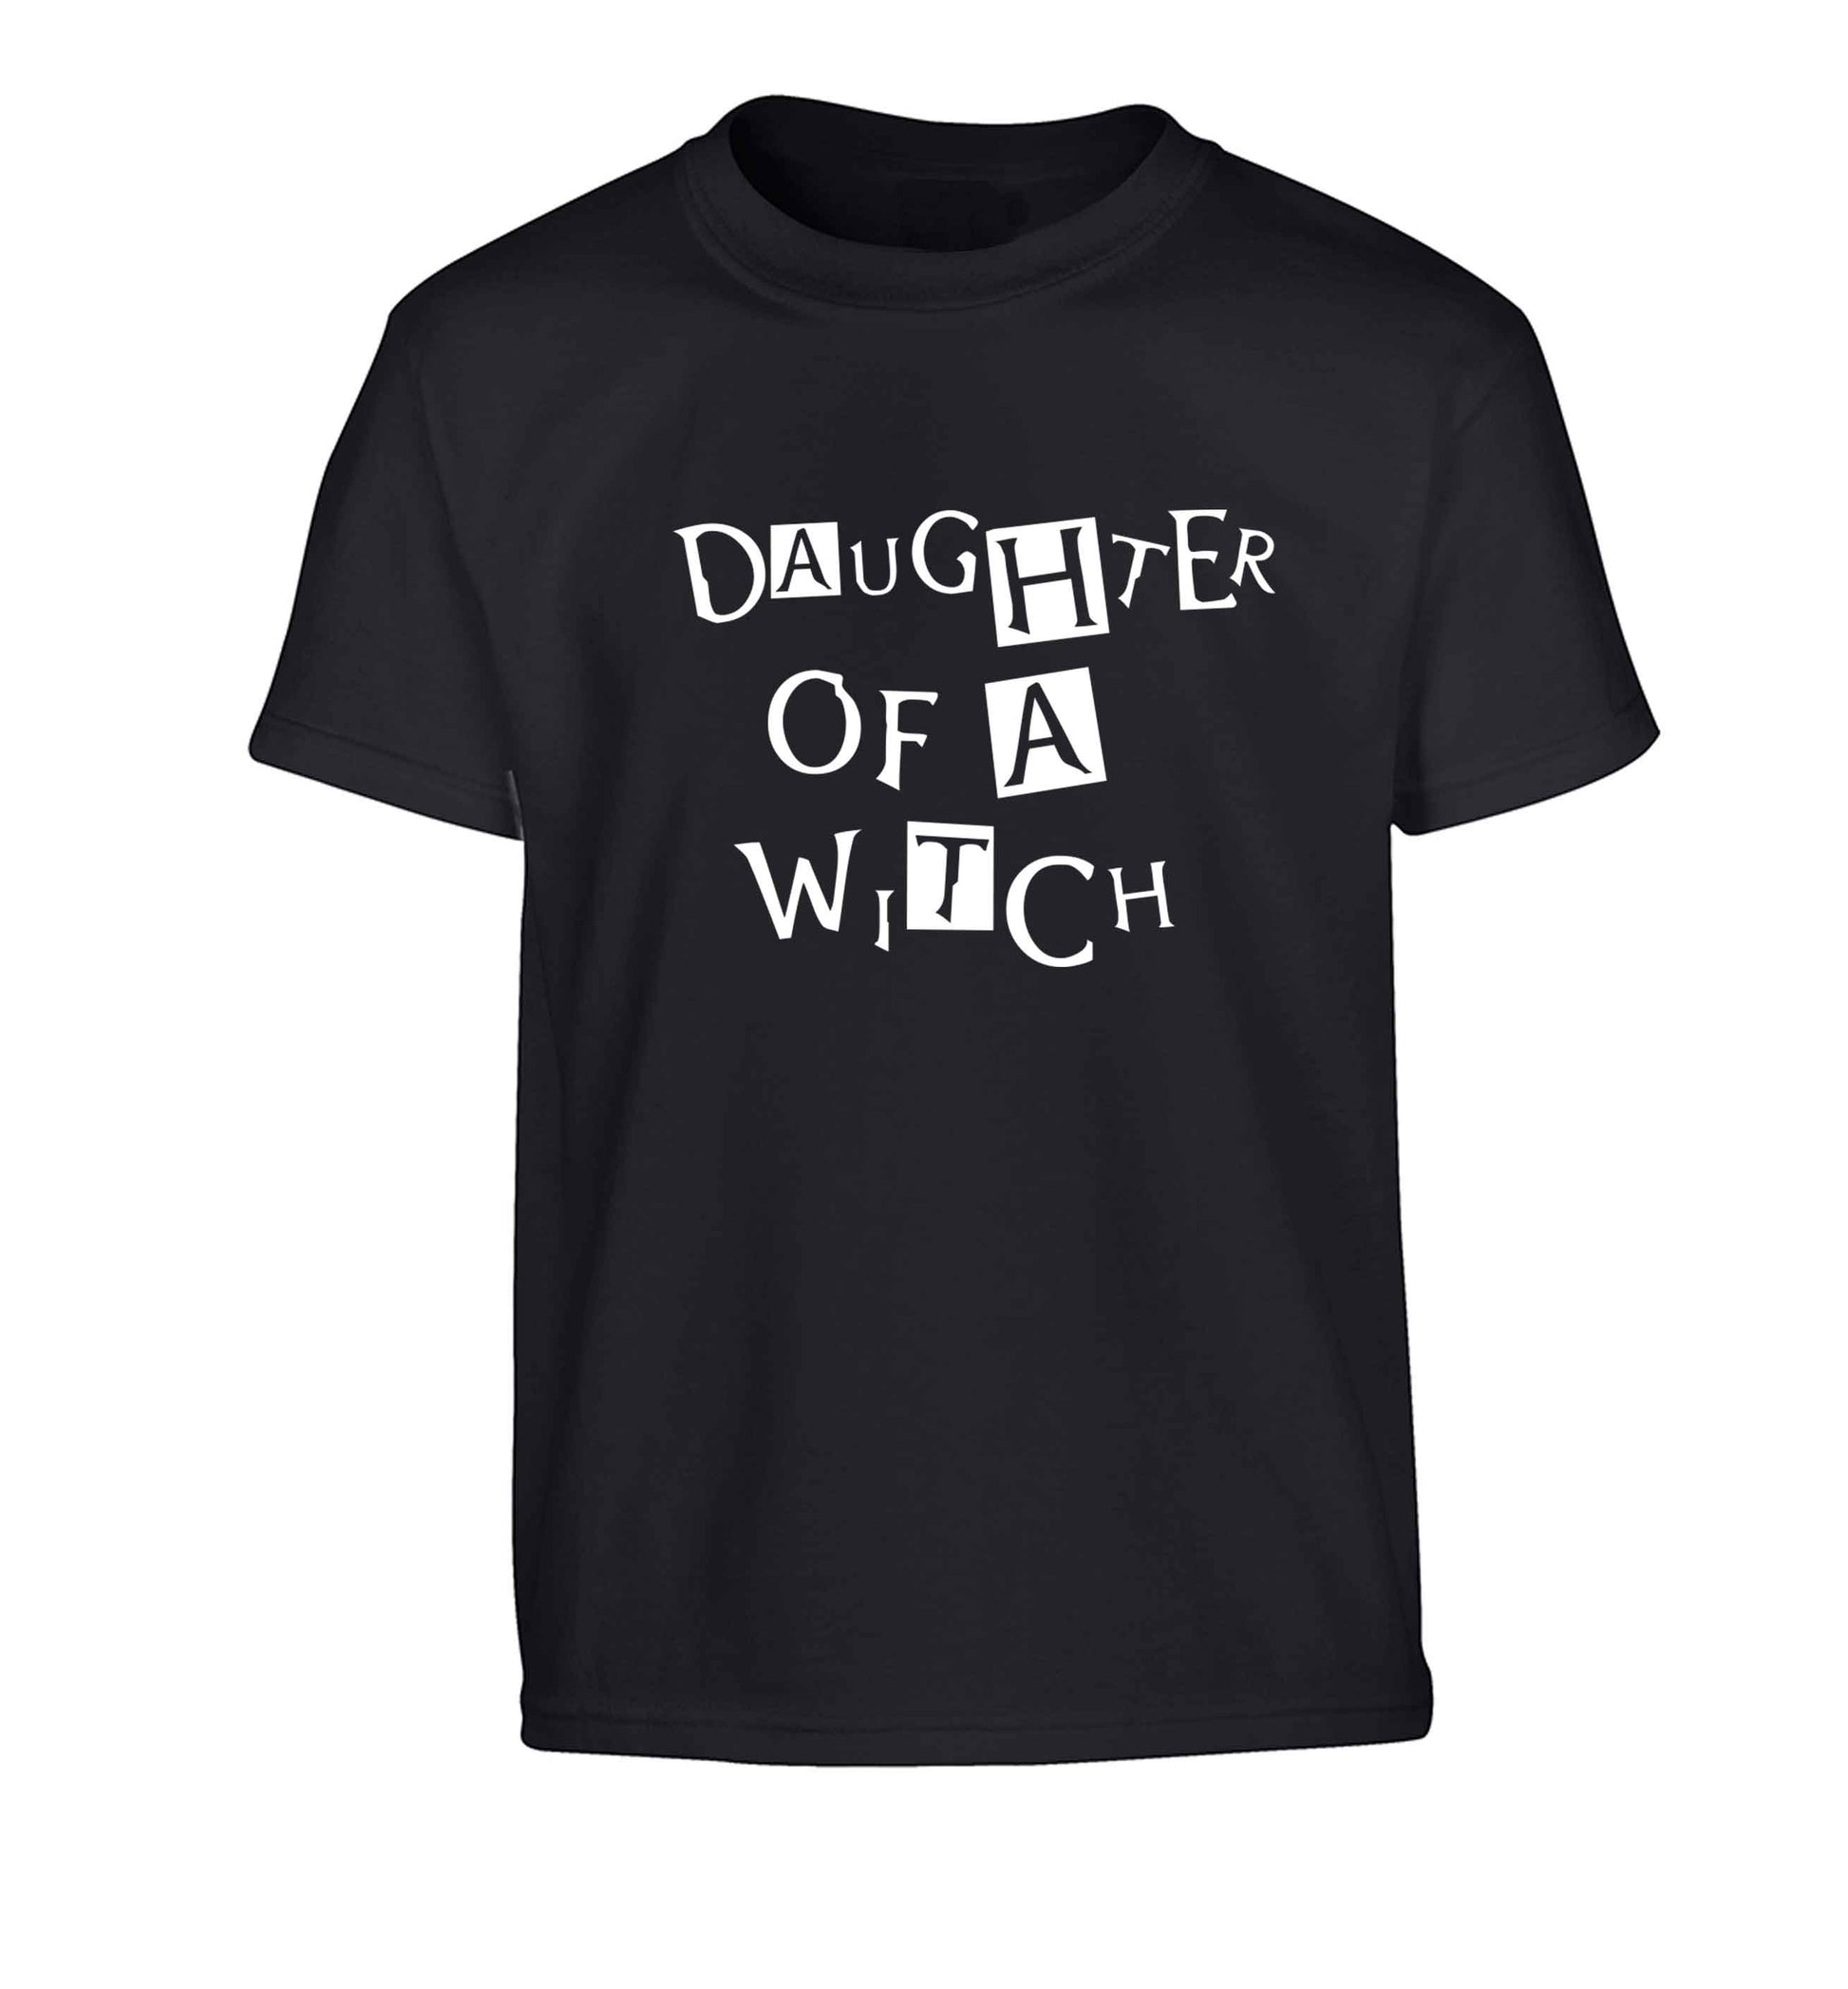 Daughter of a witch Children's black Tshirt 12-13 Years